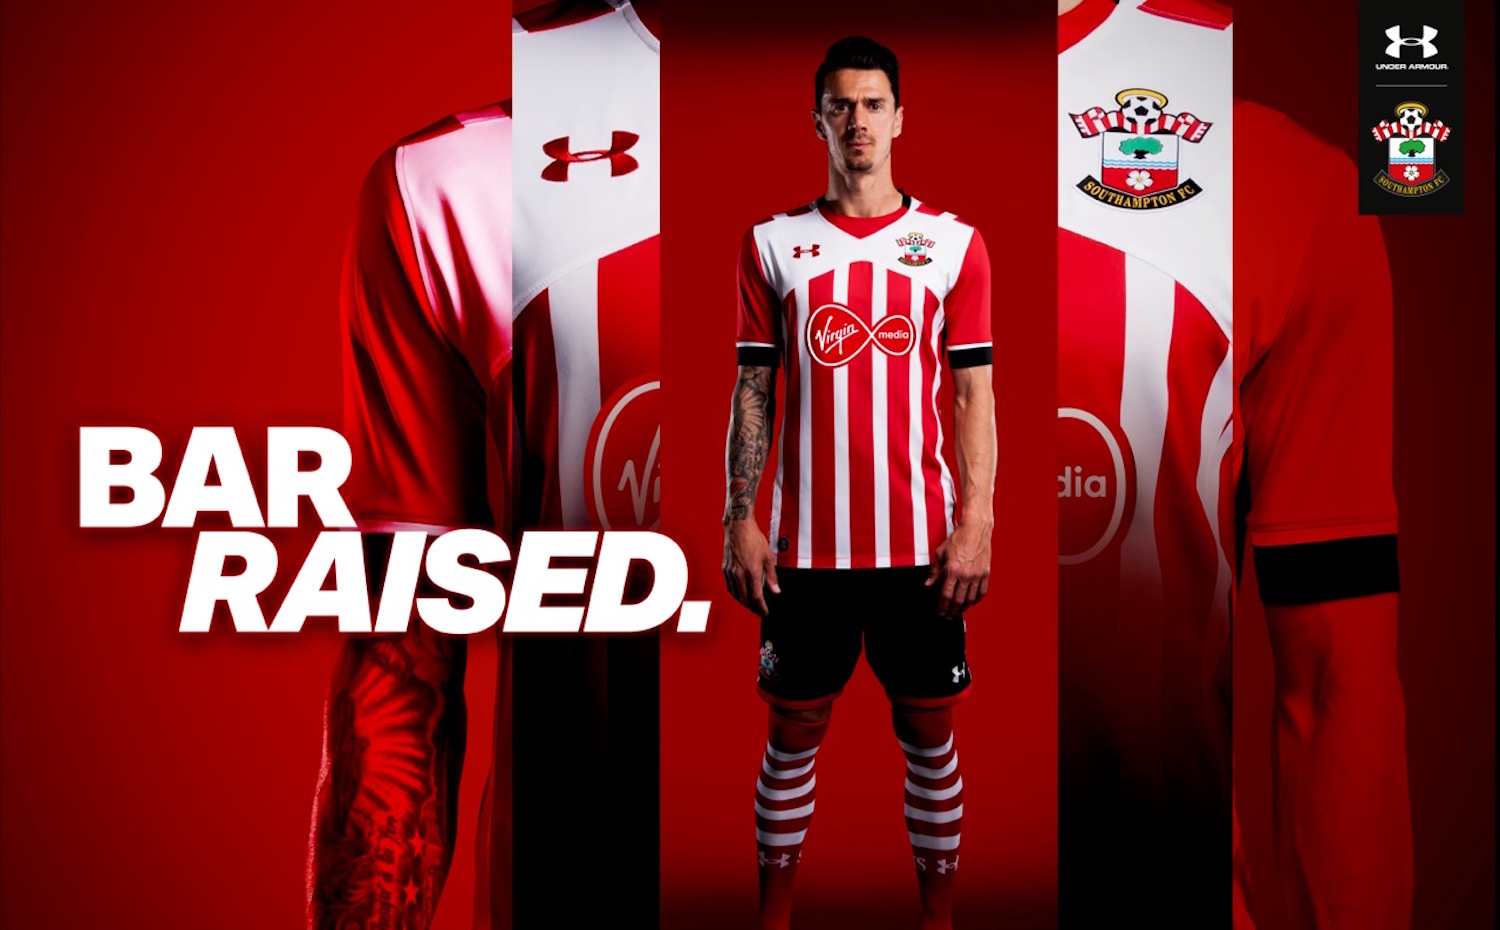 Badly suck shield Southampton FC and Under Armour Launch New Kits - WearTesters